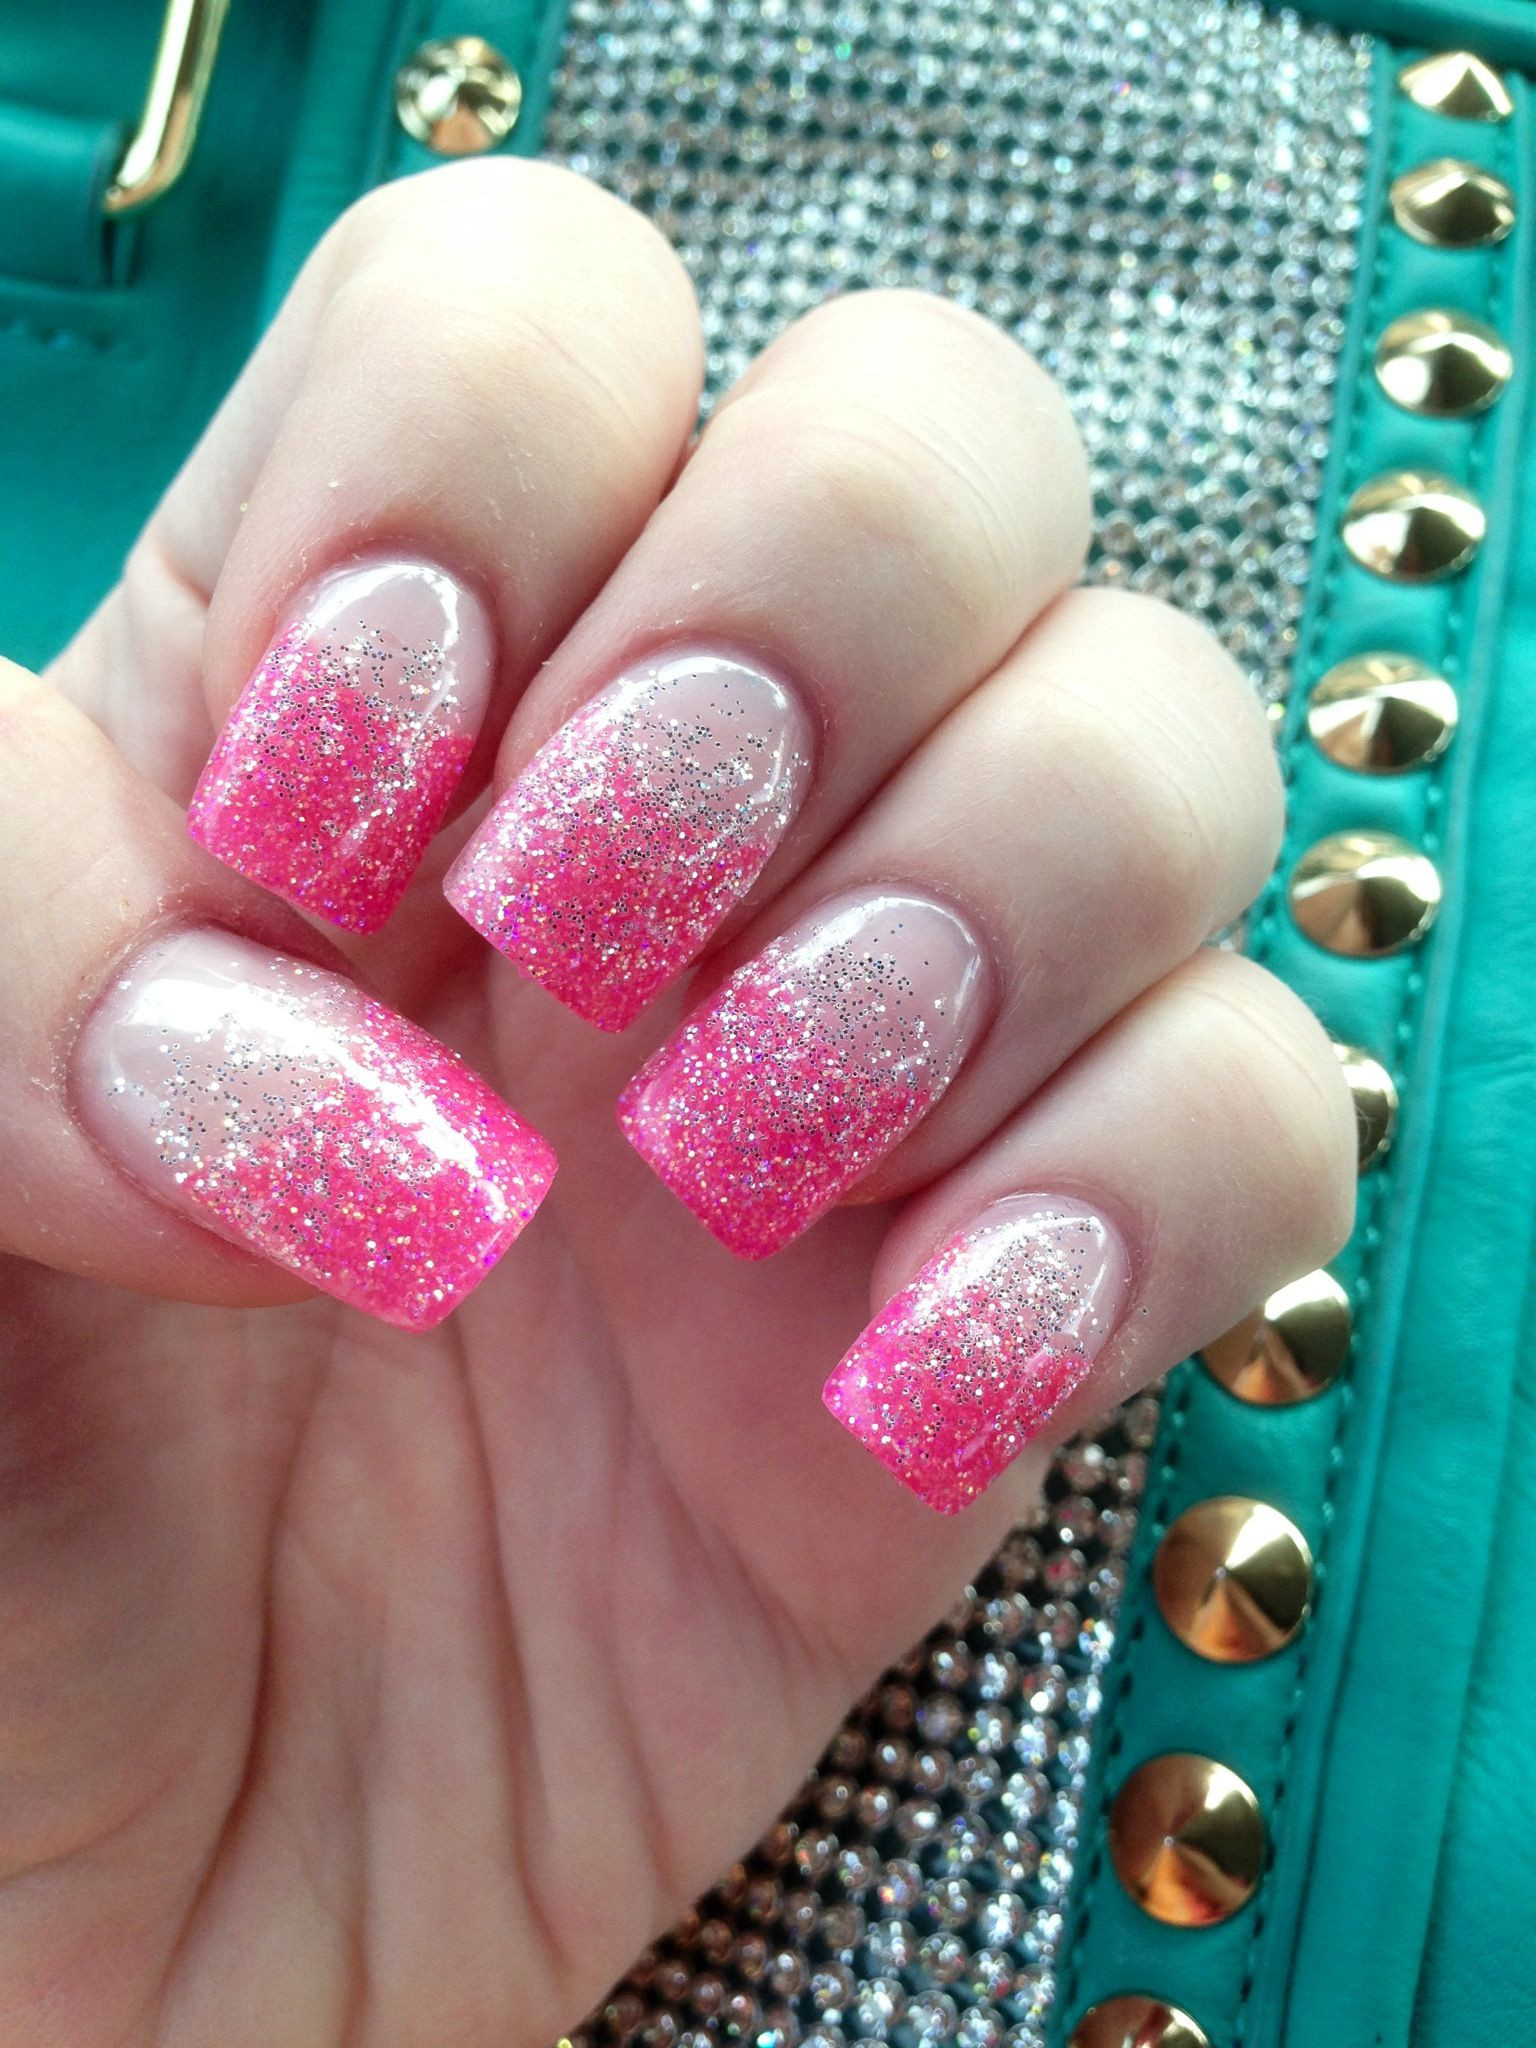 Glitter Gel Nail Designs
 Pink tips with silver glitter gel nails With images